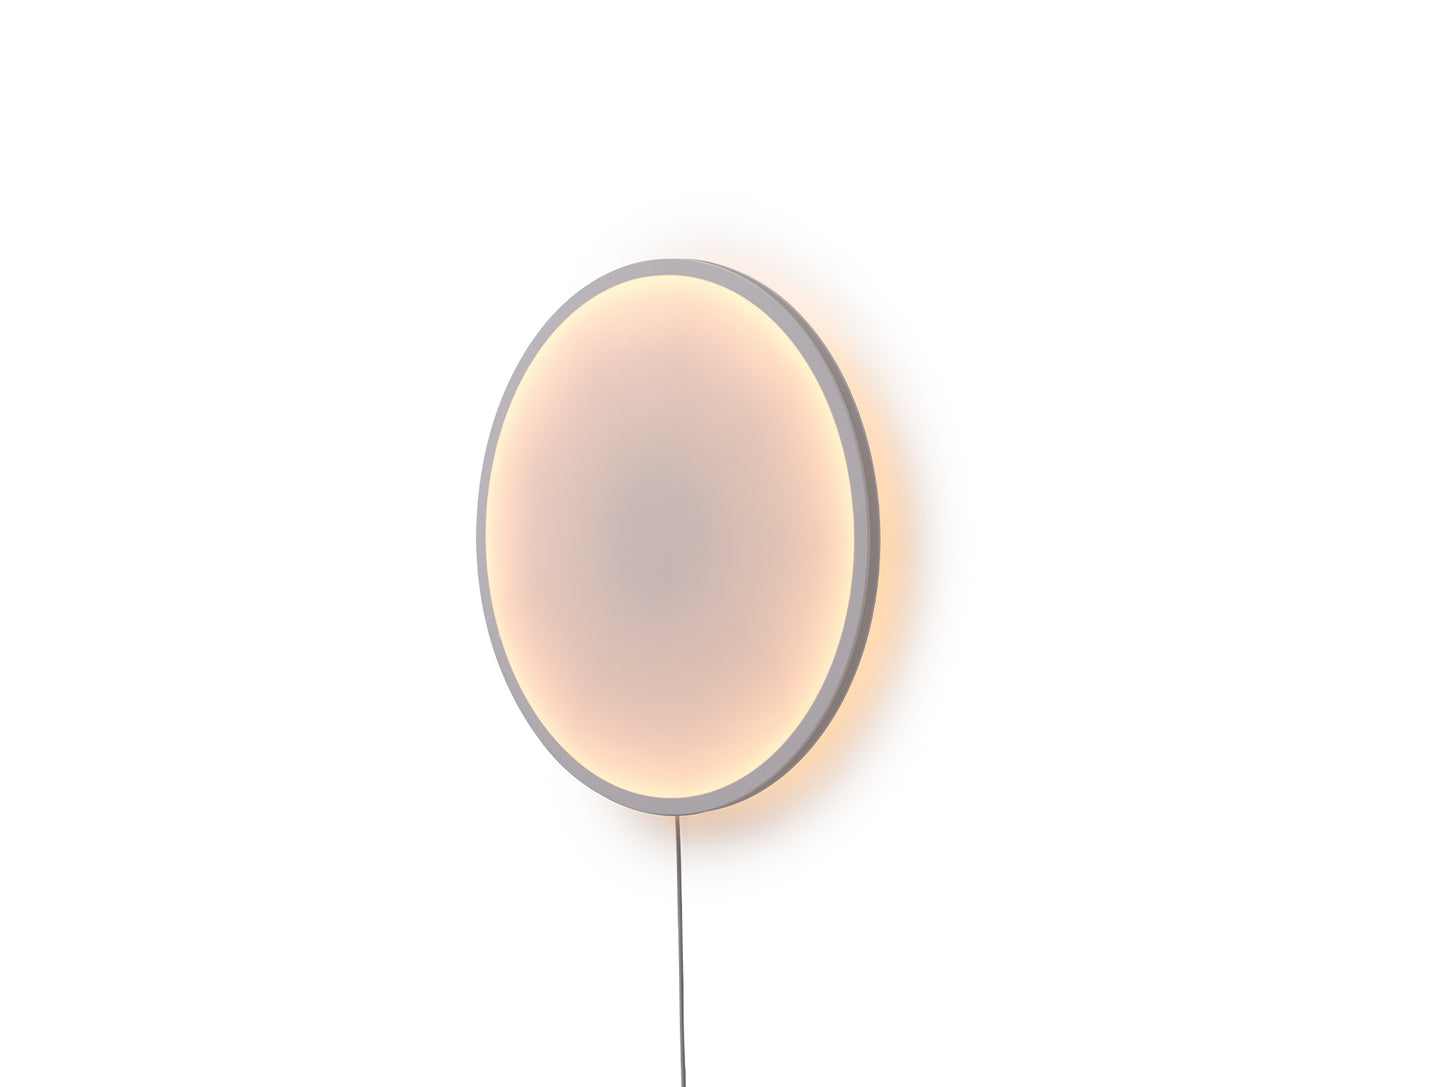 Calm Wall Lamp by Muuto - D68 cm / With an Inline Dimmer and Plug / White Shade / Grey Edge.